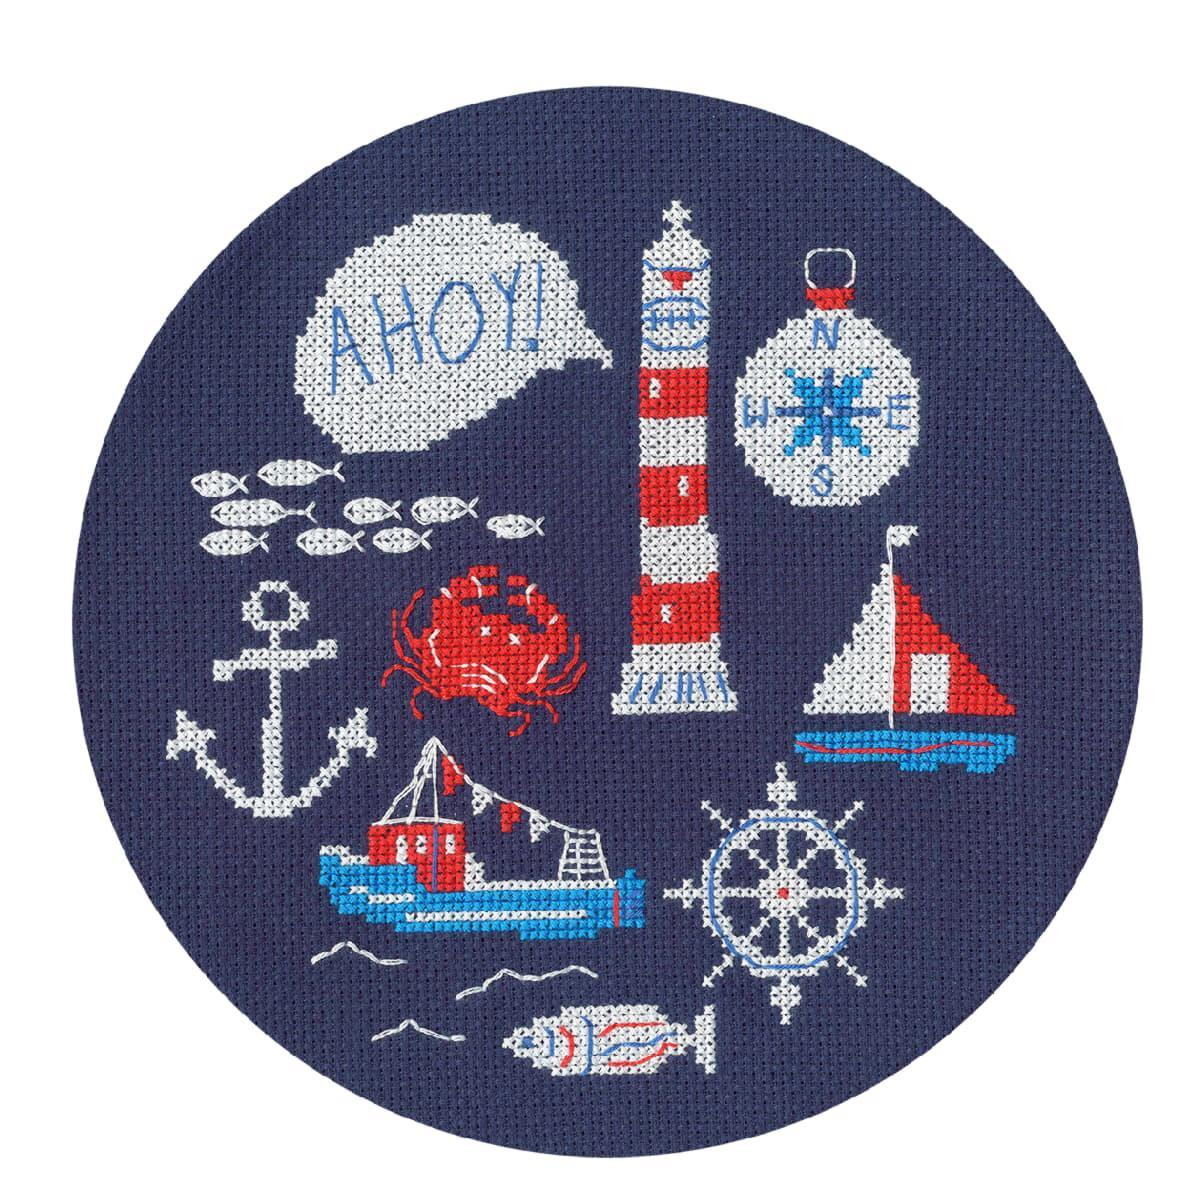 Bothy Threads counted cross stitch kit "Ahoy",...